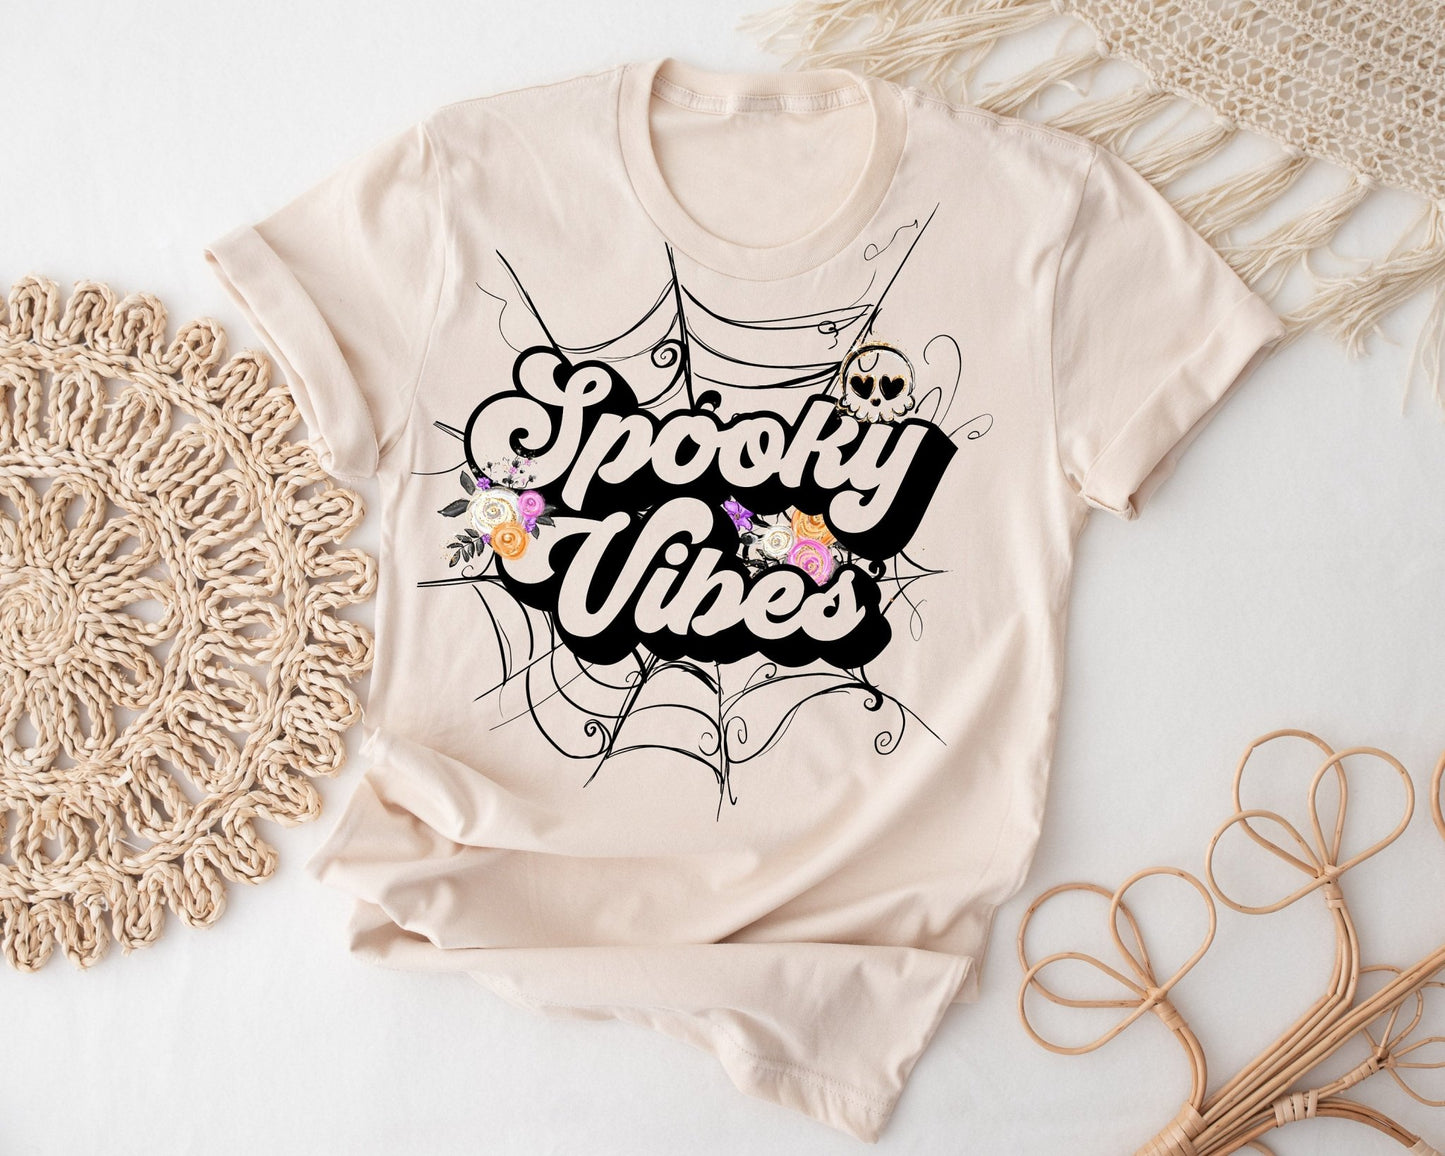 Spooky Vibes Girls Halloween Shirt Funny Retro Halloween Outfit Toddler - Adult Sizing - Squishy Cheeks